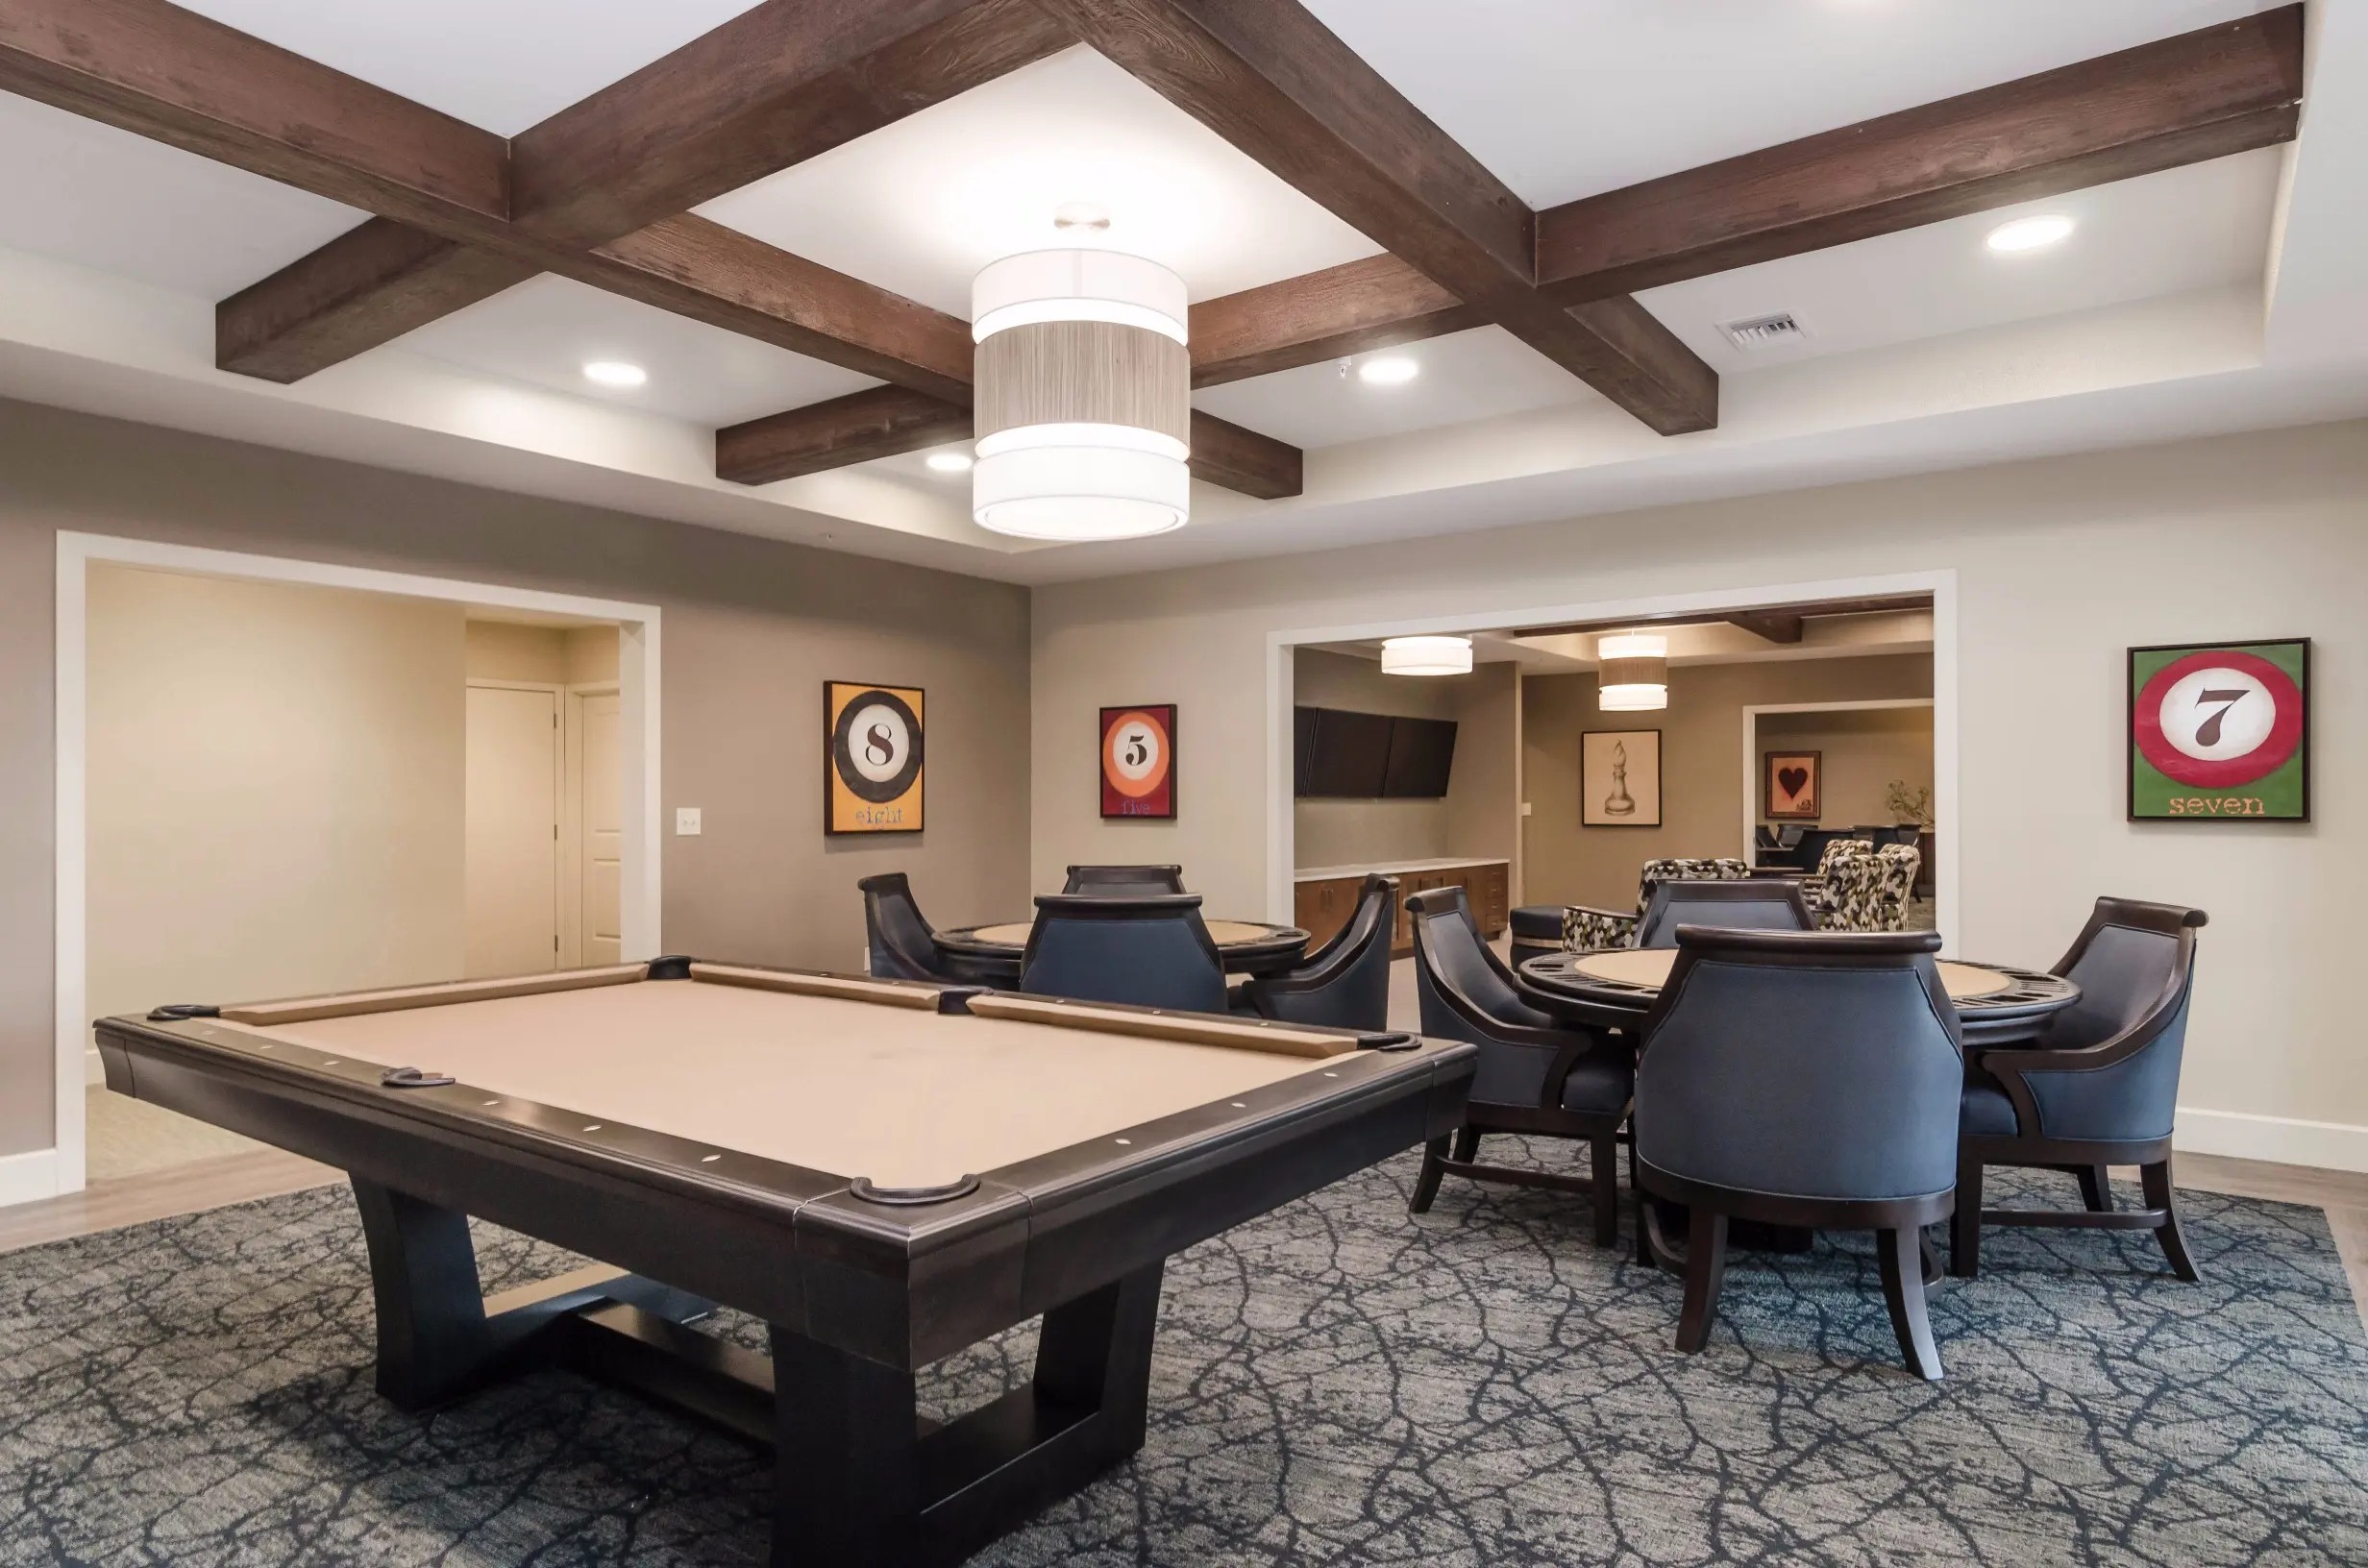 Game / common area at American House Coconut Point, a senior living community in Estero, FL